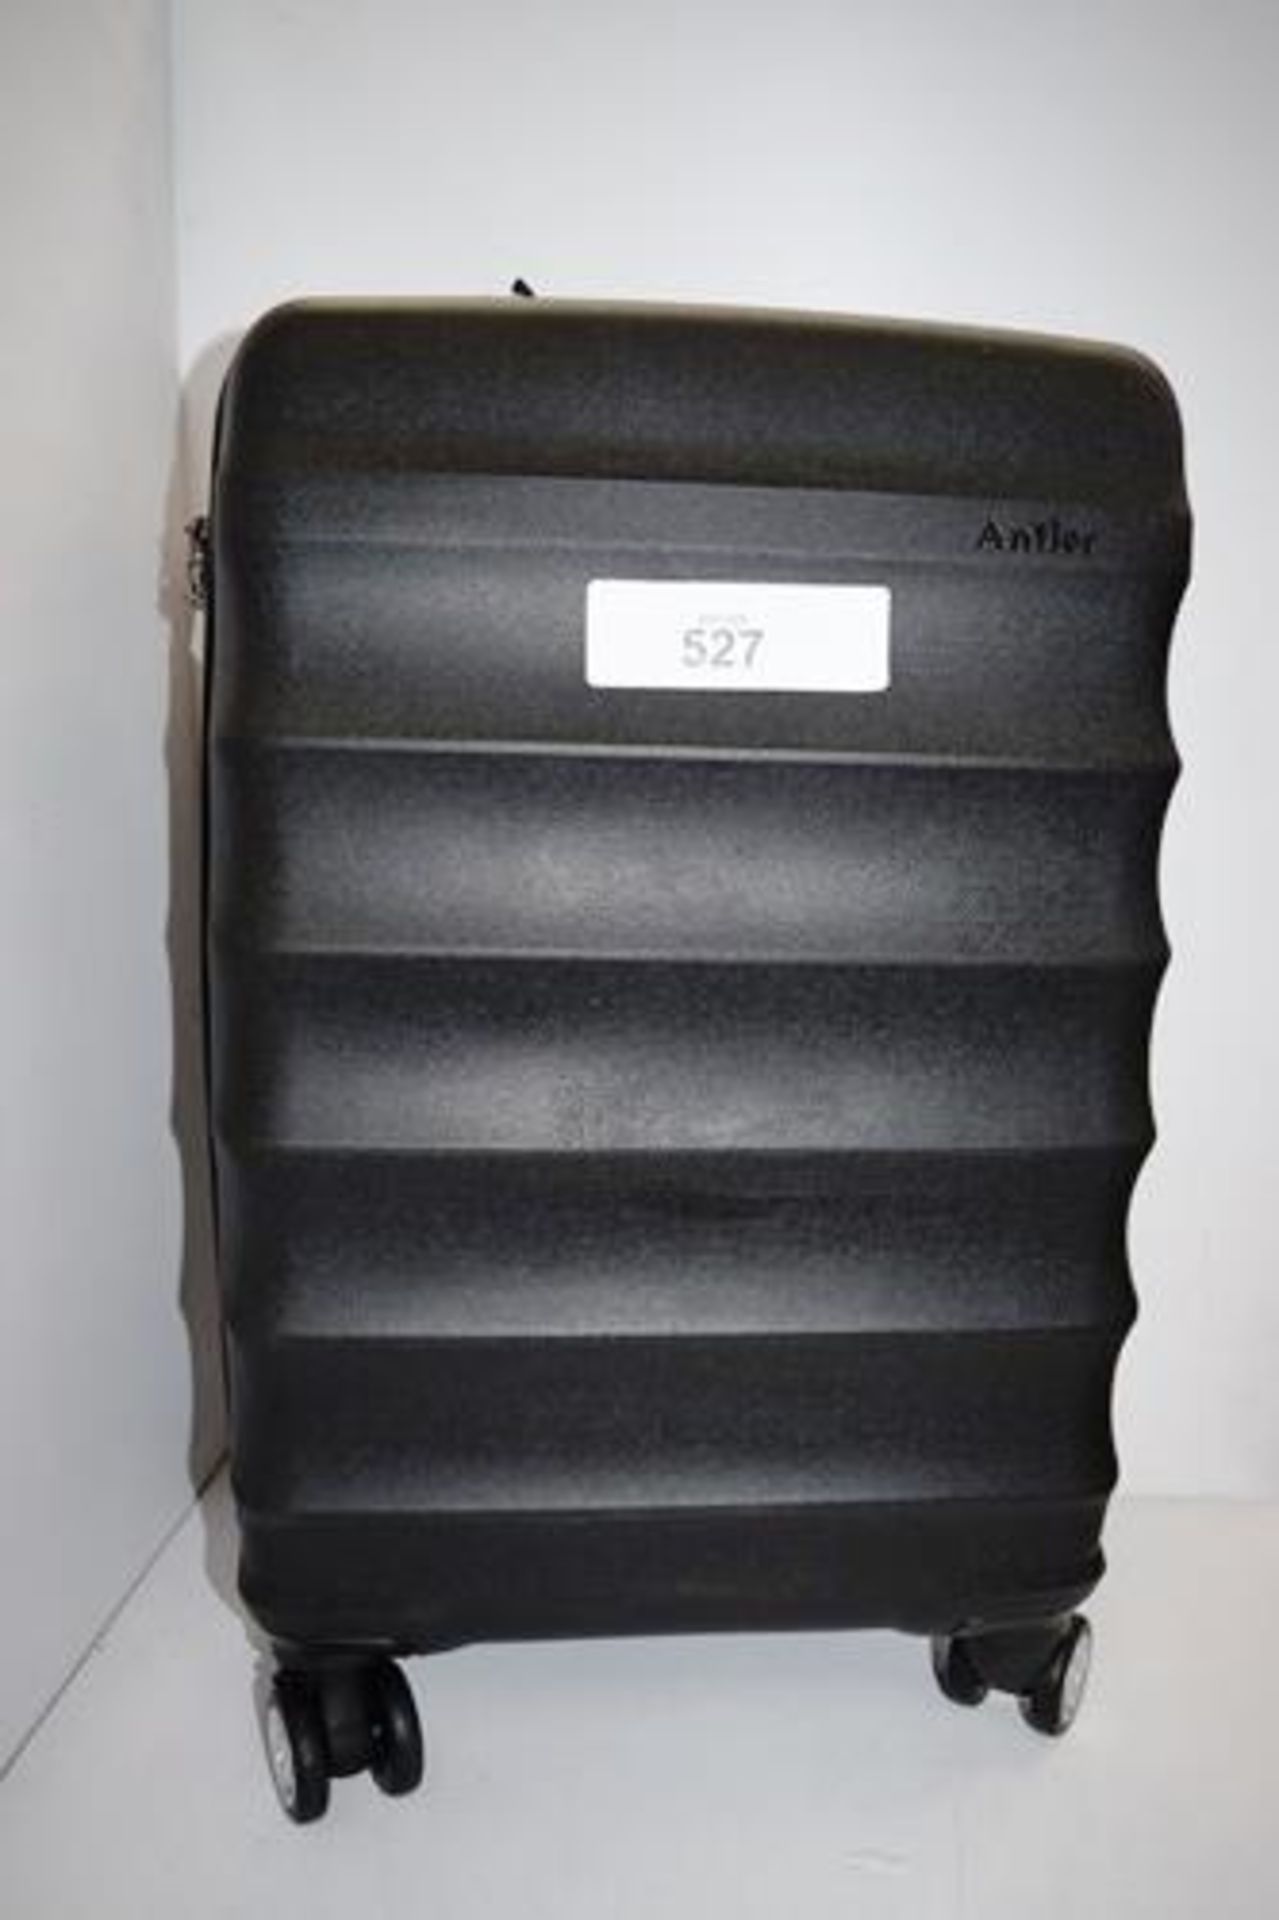 1 x Antler Juno case, model 3490124026 - New with tags (ES10) - Image 3 of 3